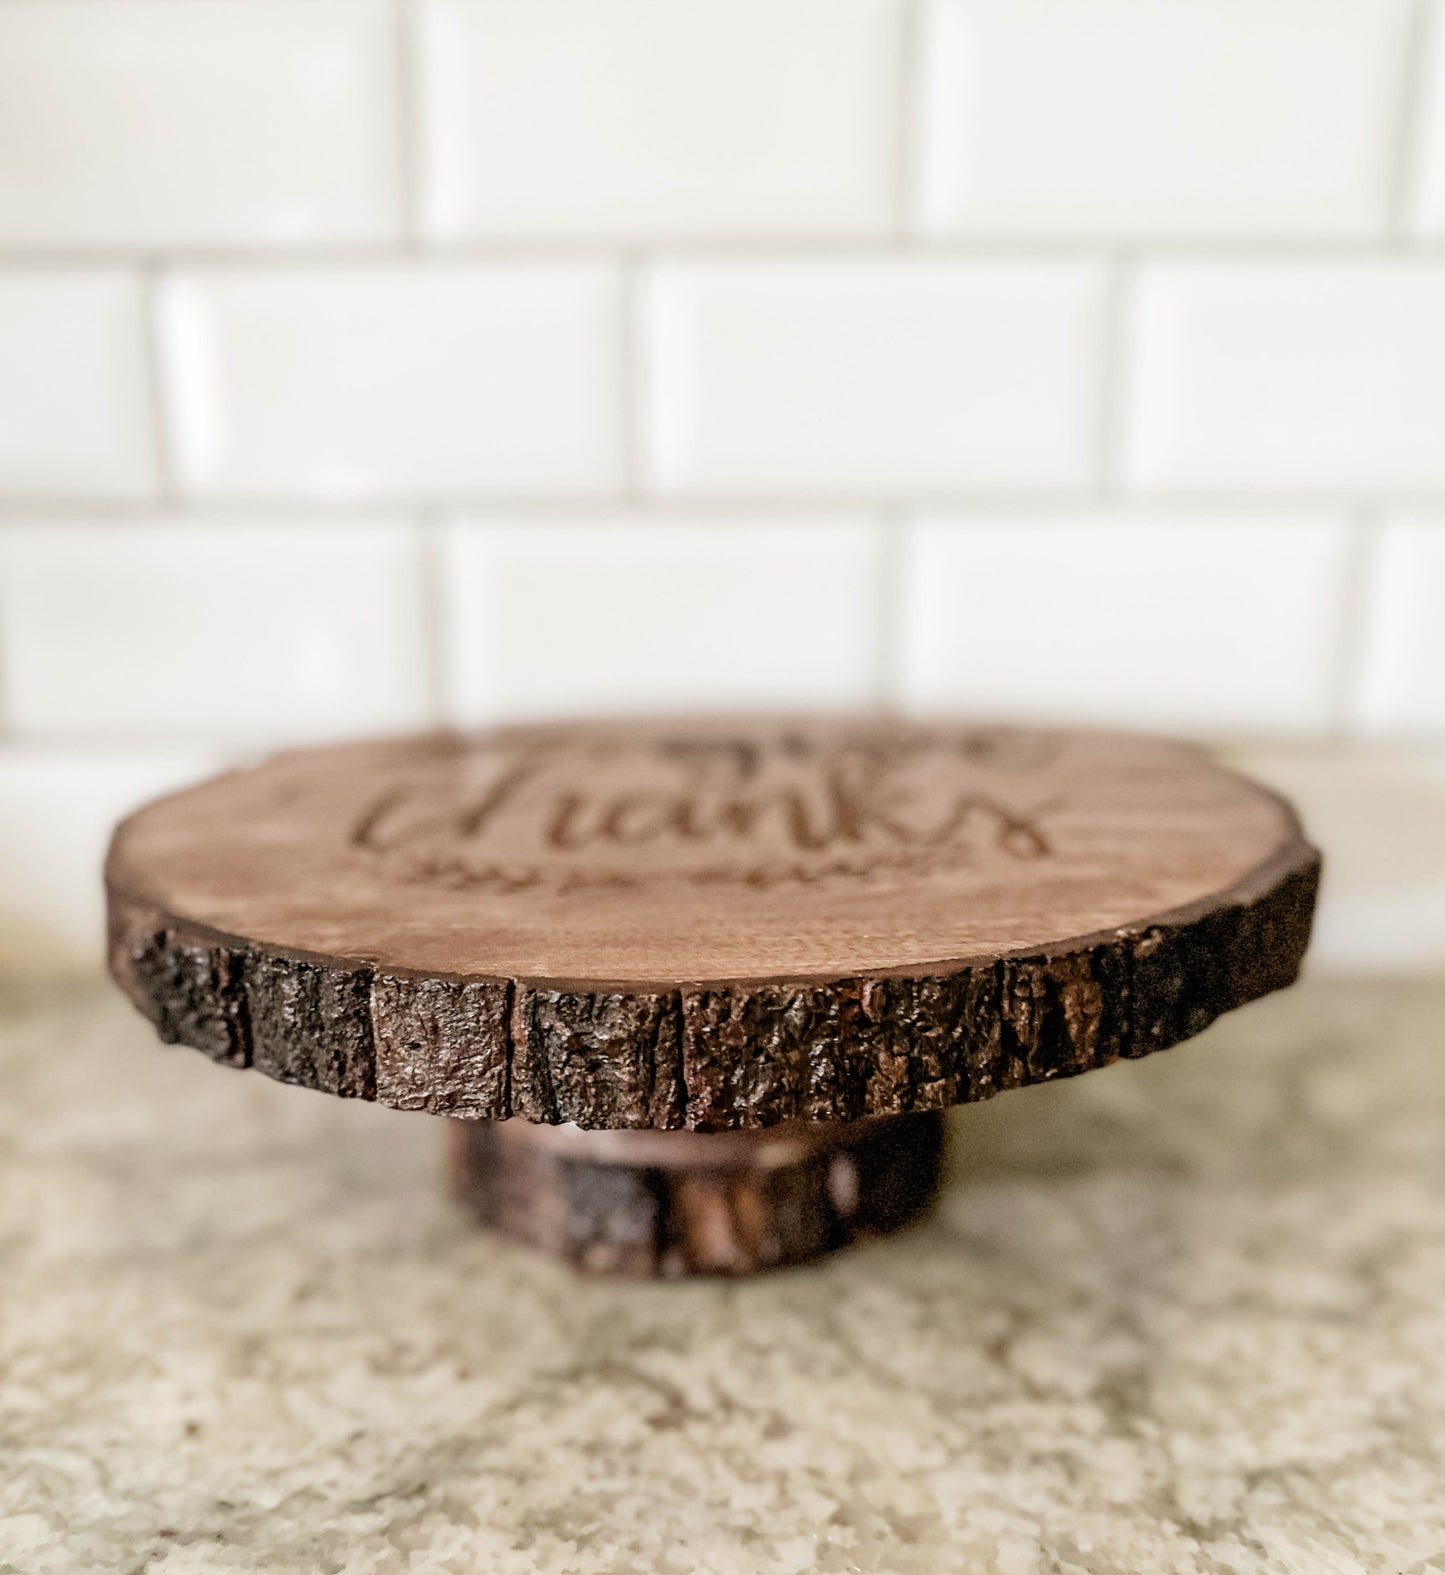 Give Thanks pedestal cake stand